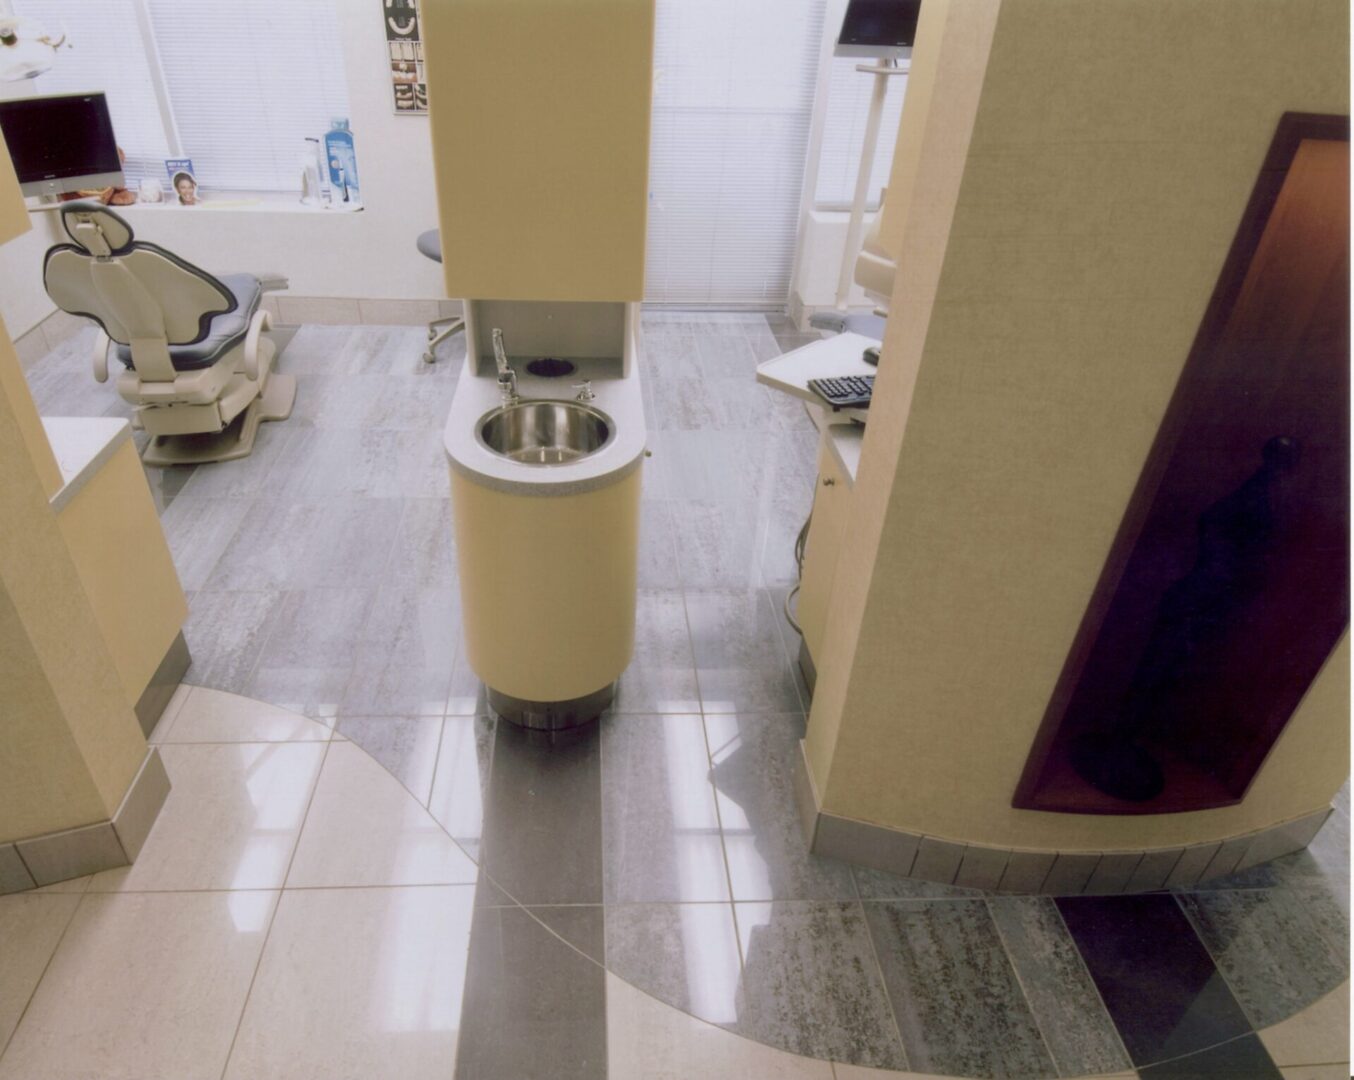 Dental office operator area with seats and basins